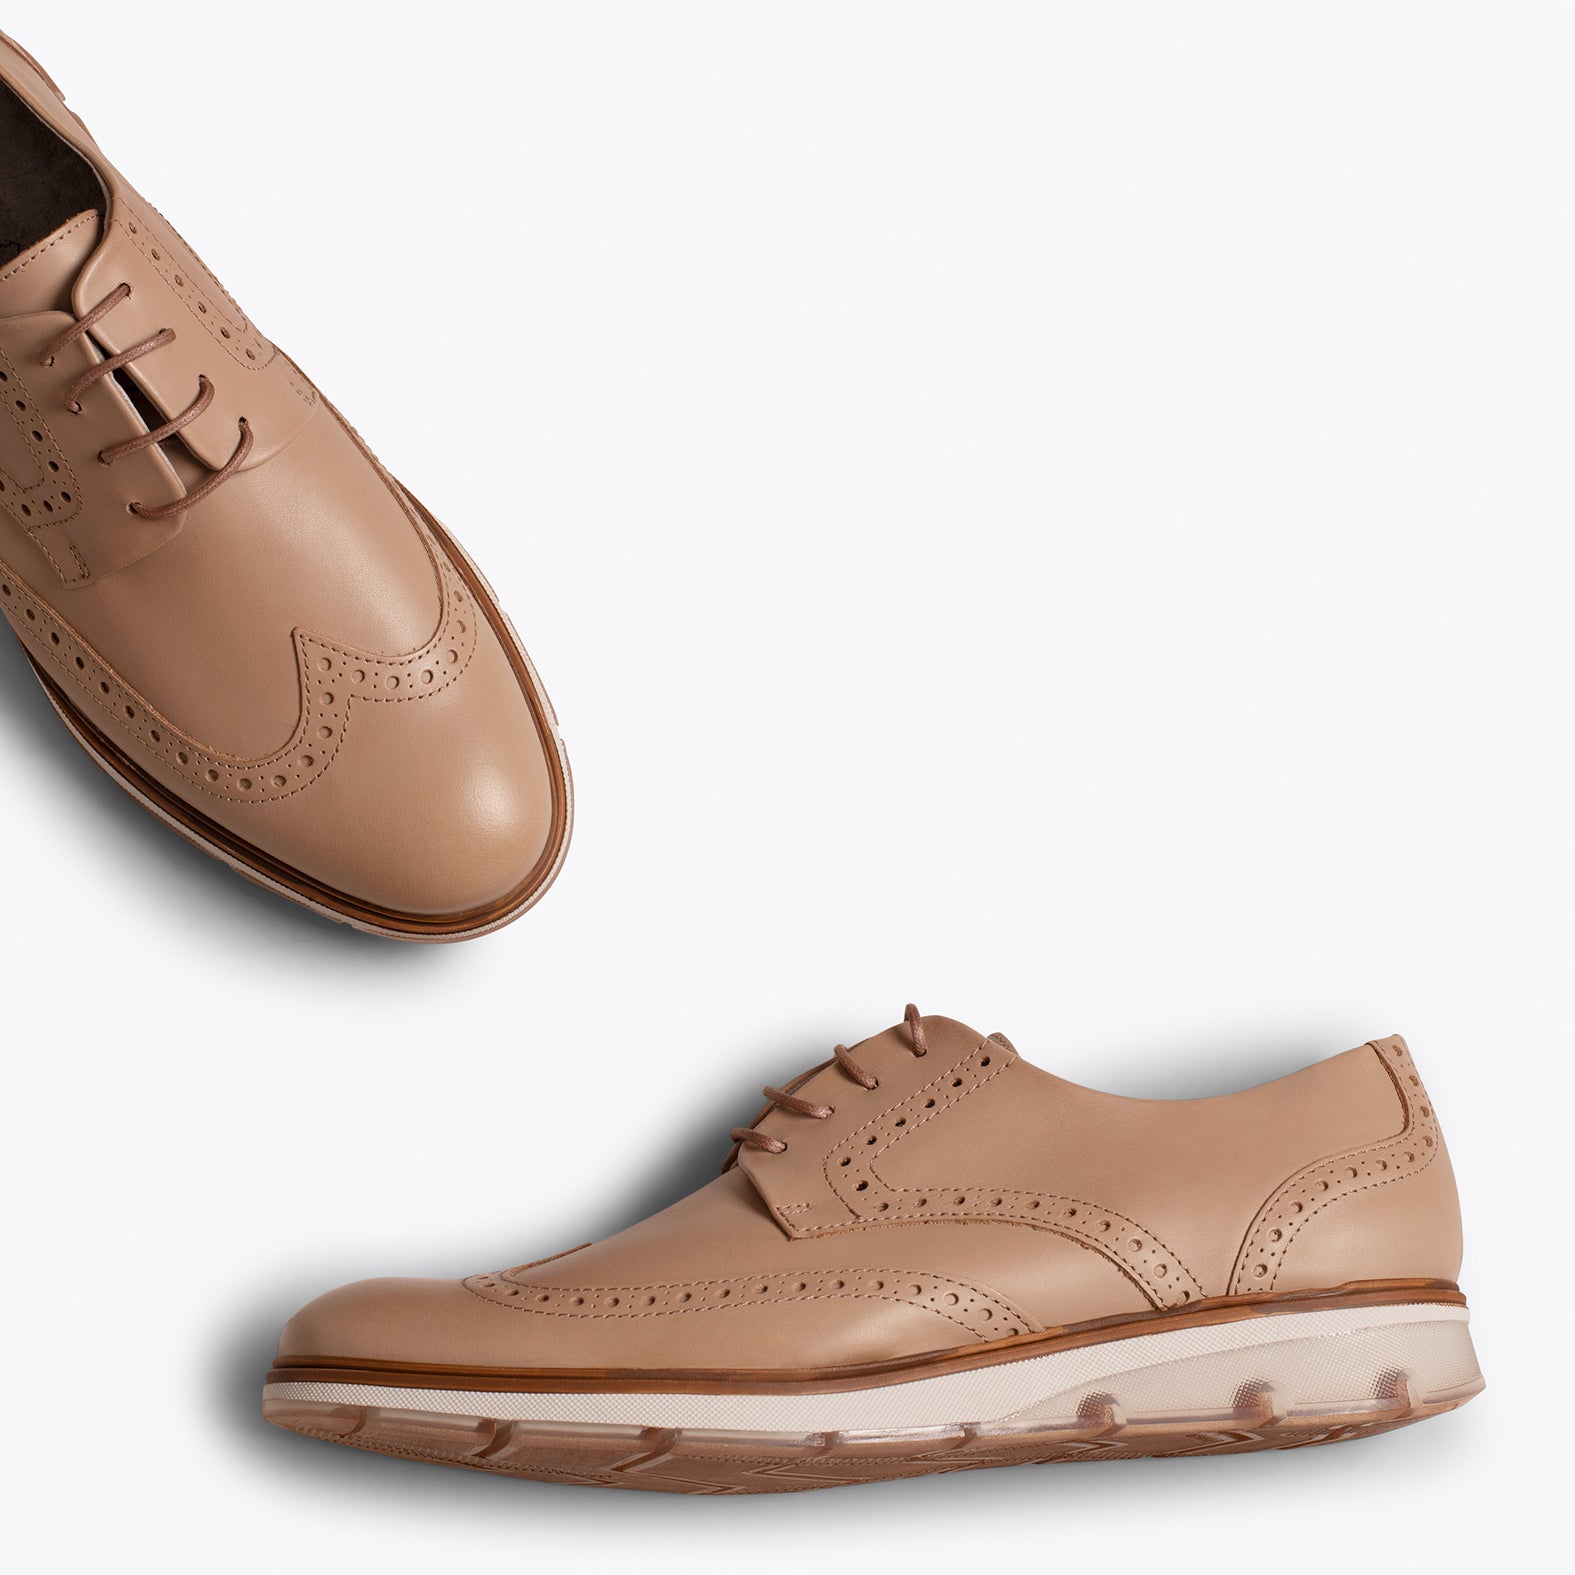 OXFORD – BEIGE classic english style brogue